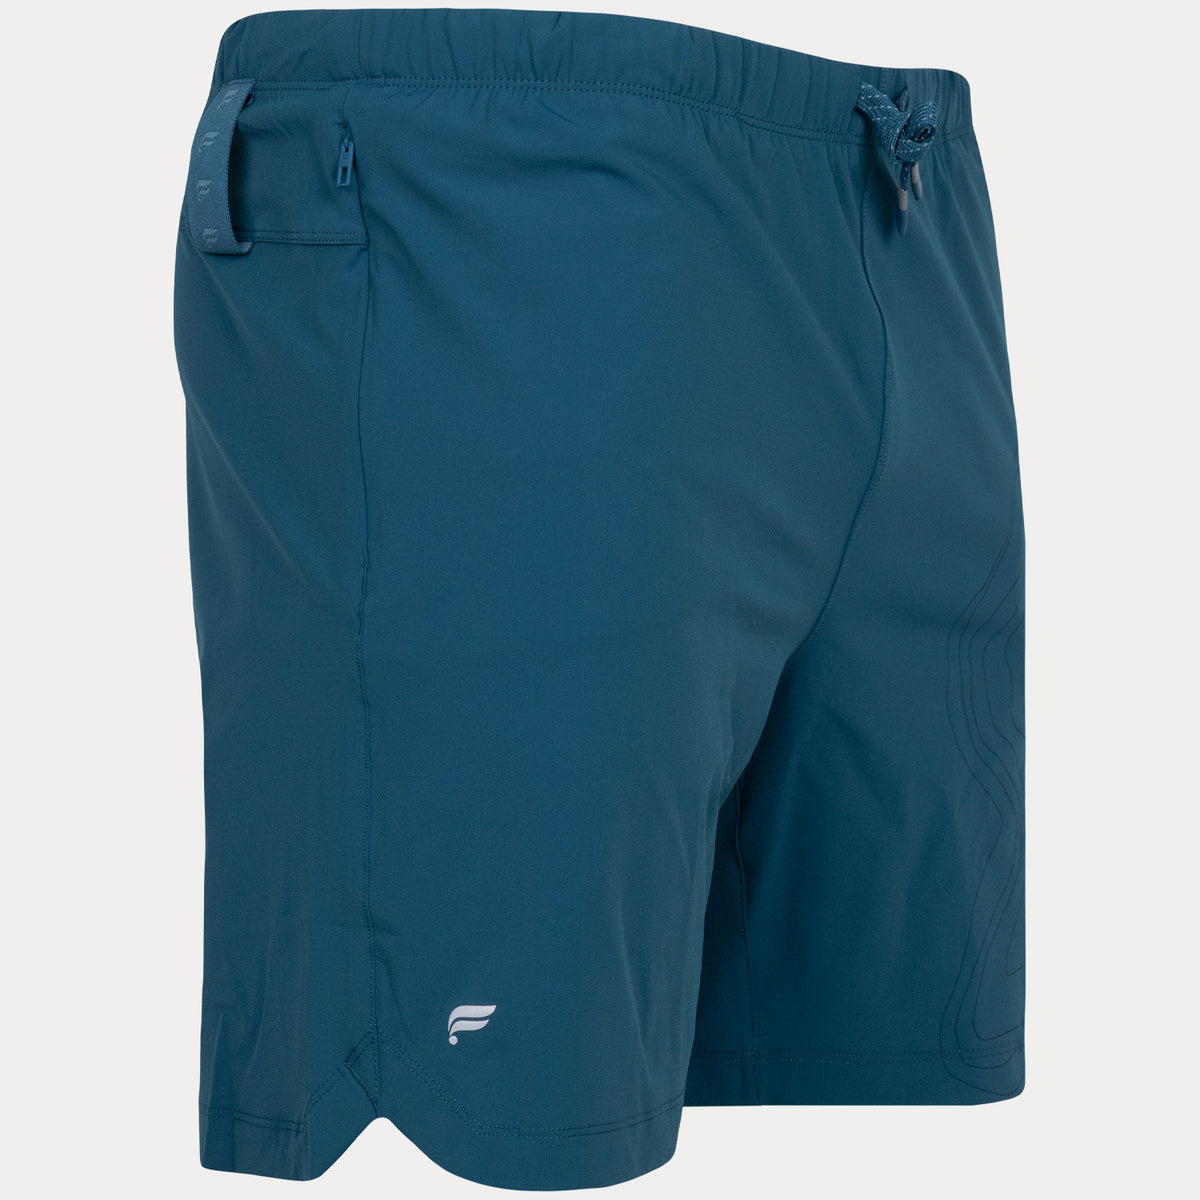 angled view of dark blue short showing white fablectics logo on right leg